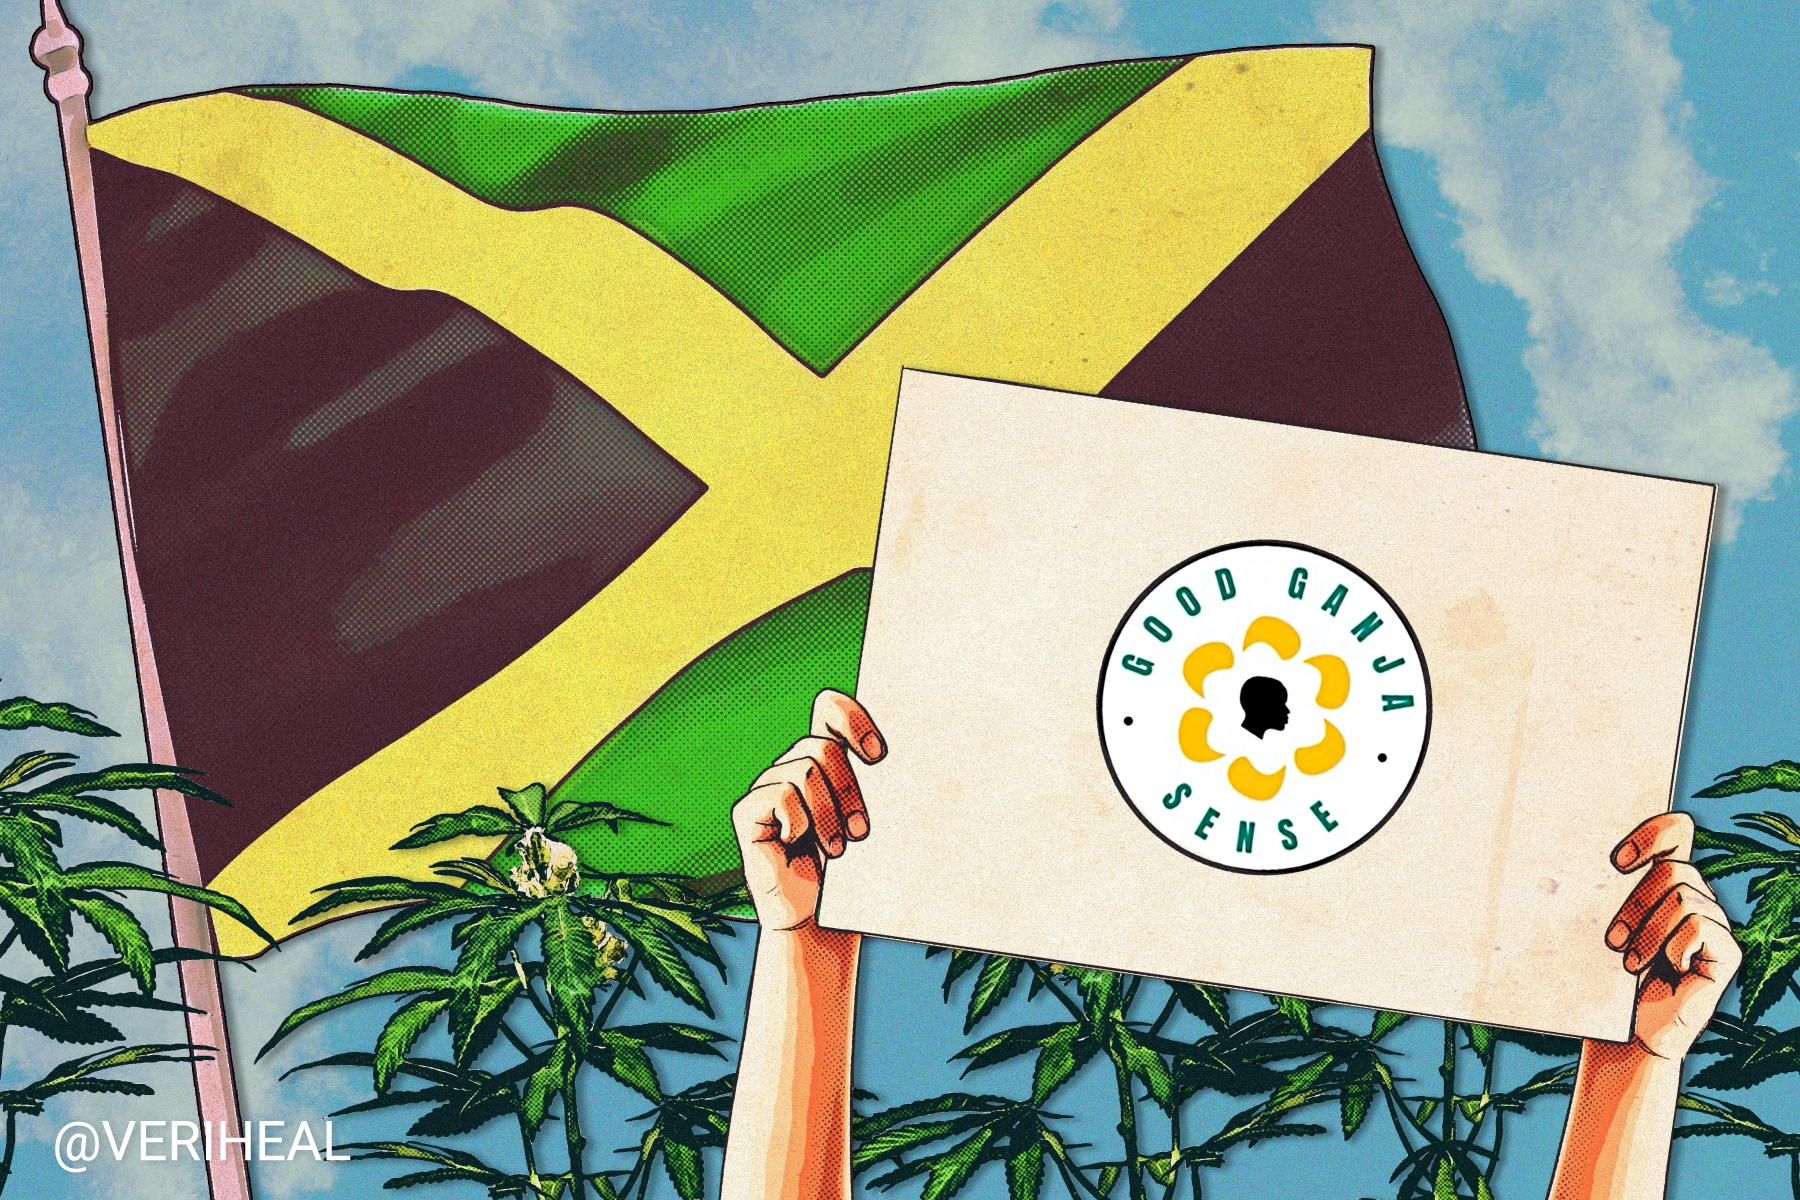 Jamaica’s ‘Good Ganja Sense’ Campaign Aims to Correct Misconceptions About Cannabis